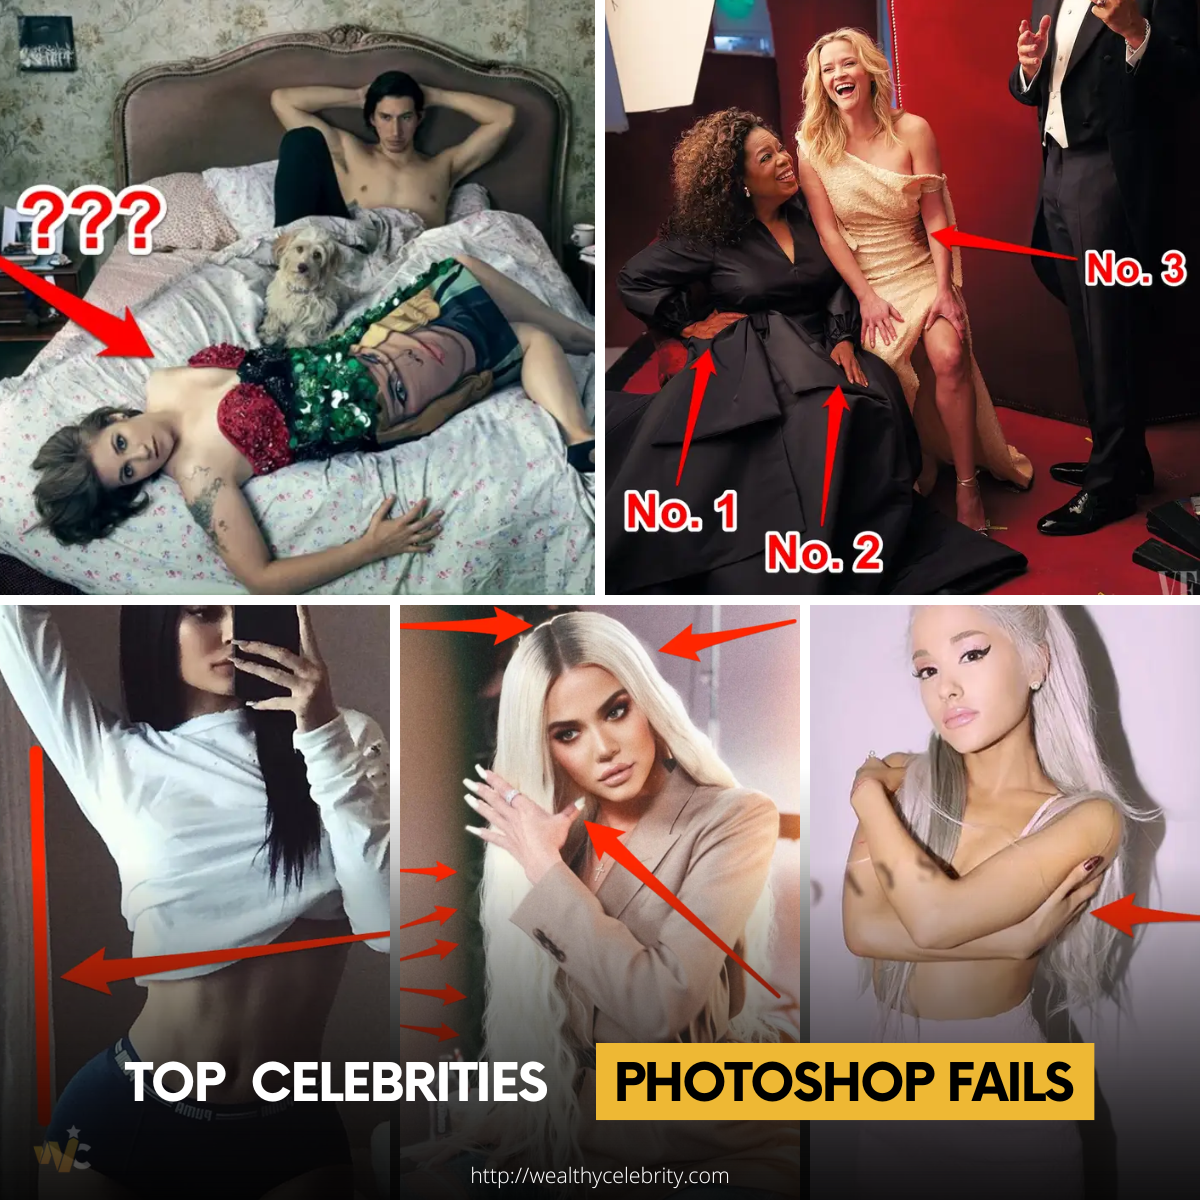 Why These Celebrities ‘Embarrassed’ Themselves Using Photoshop? – The Top 54 Celebrity Photoshop Fails You Need To See